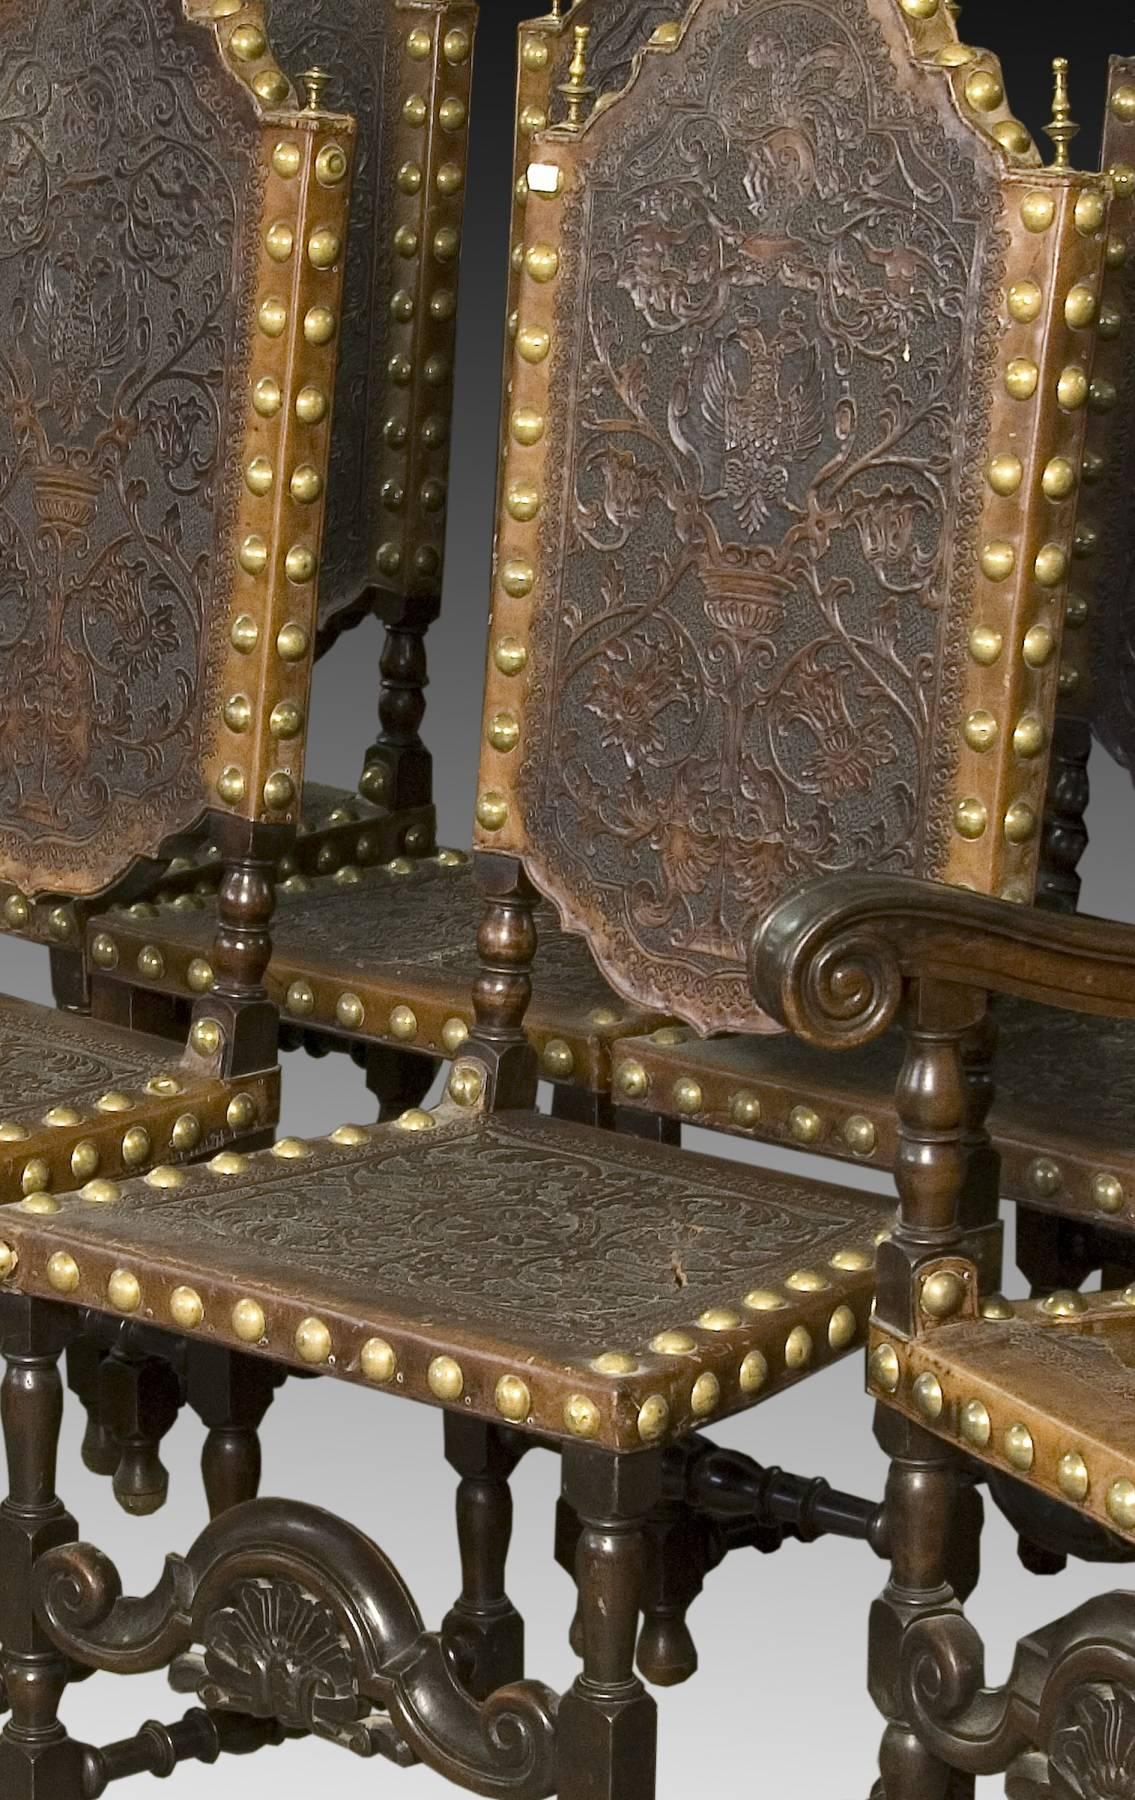 Seats in walnut and embossed leather, 19th century. Set of six chairs and two matching armchairs, made of walnut and with seat and back in embossed leather (some leathers require restoration). The structure is based on the traditional models of the